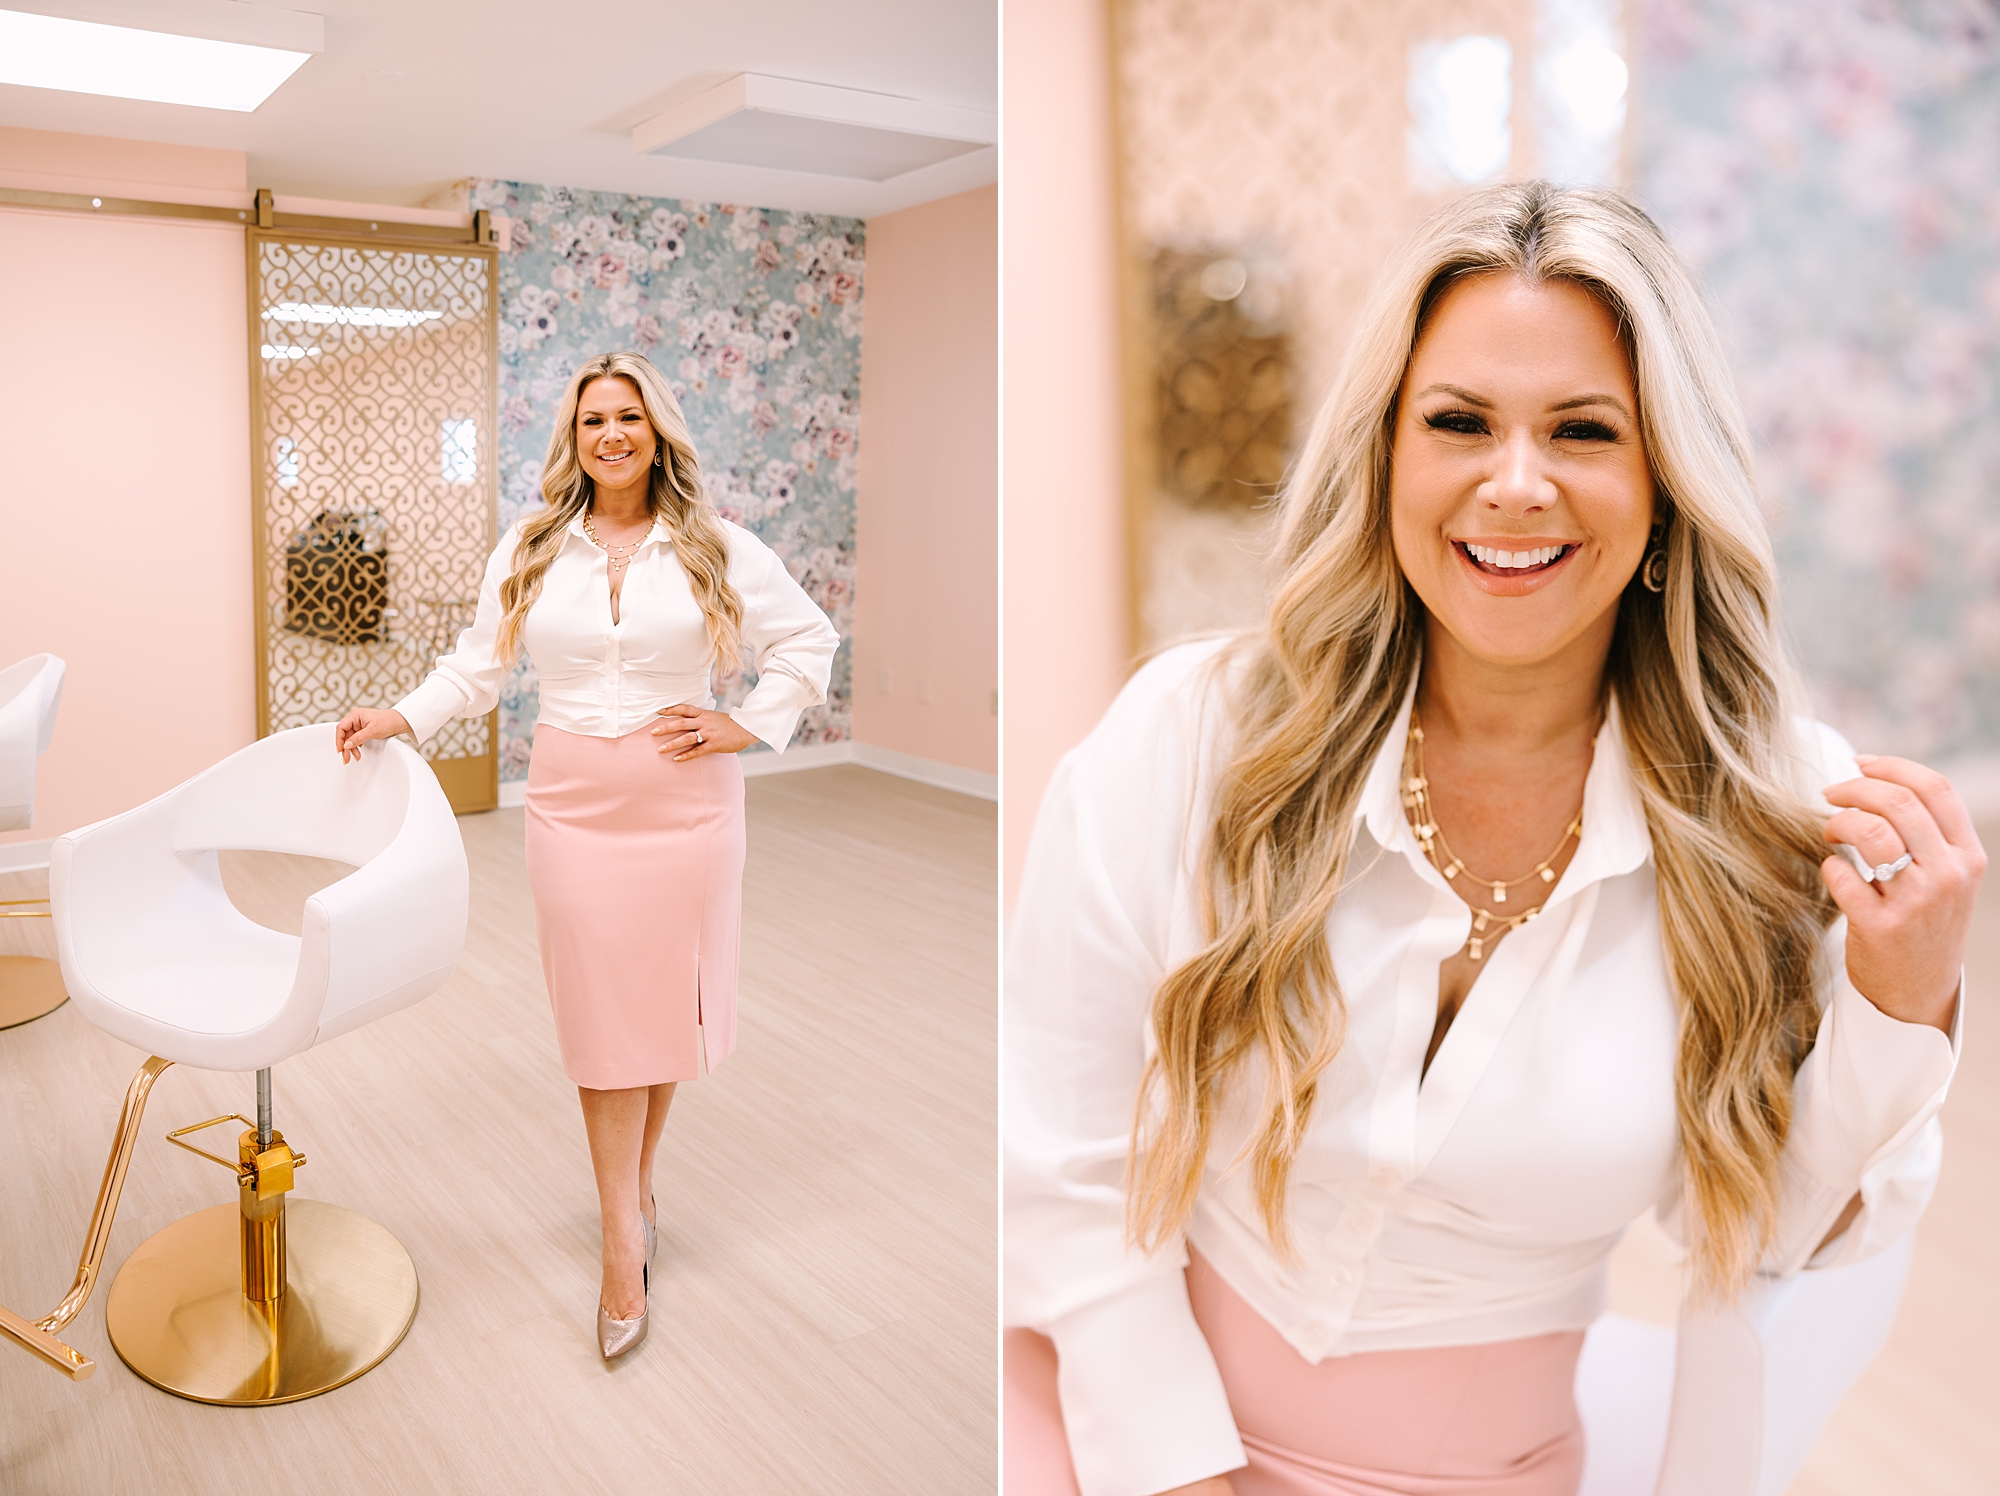 blonde woman in pink skirt laughs during MHD Beauty Parlor branding session